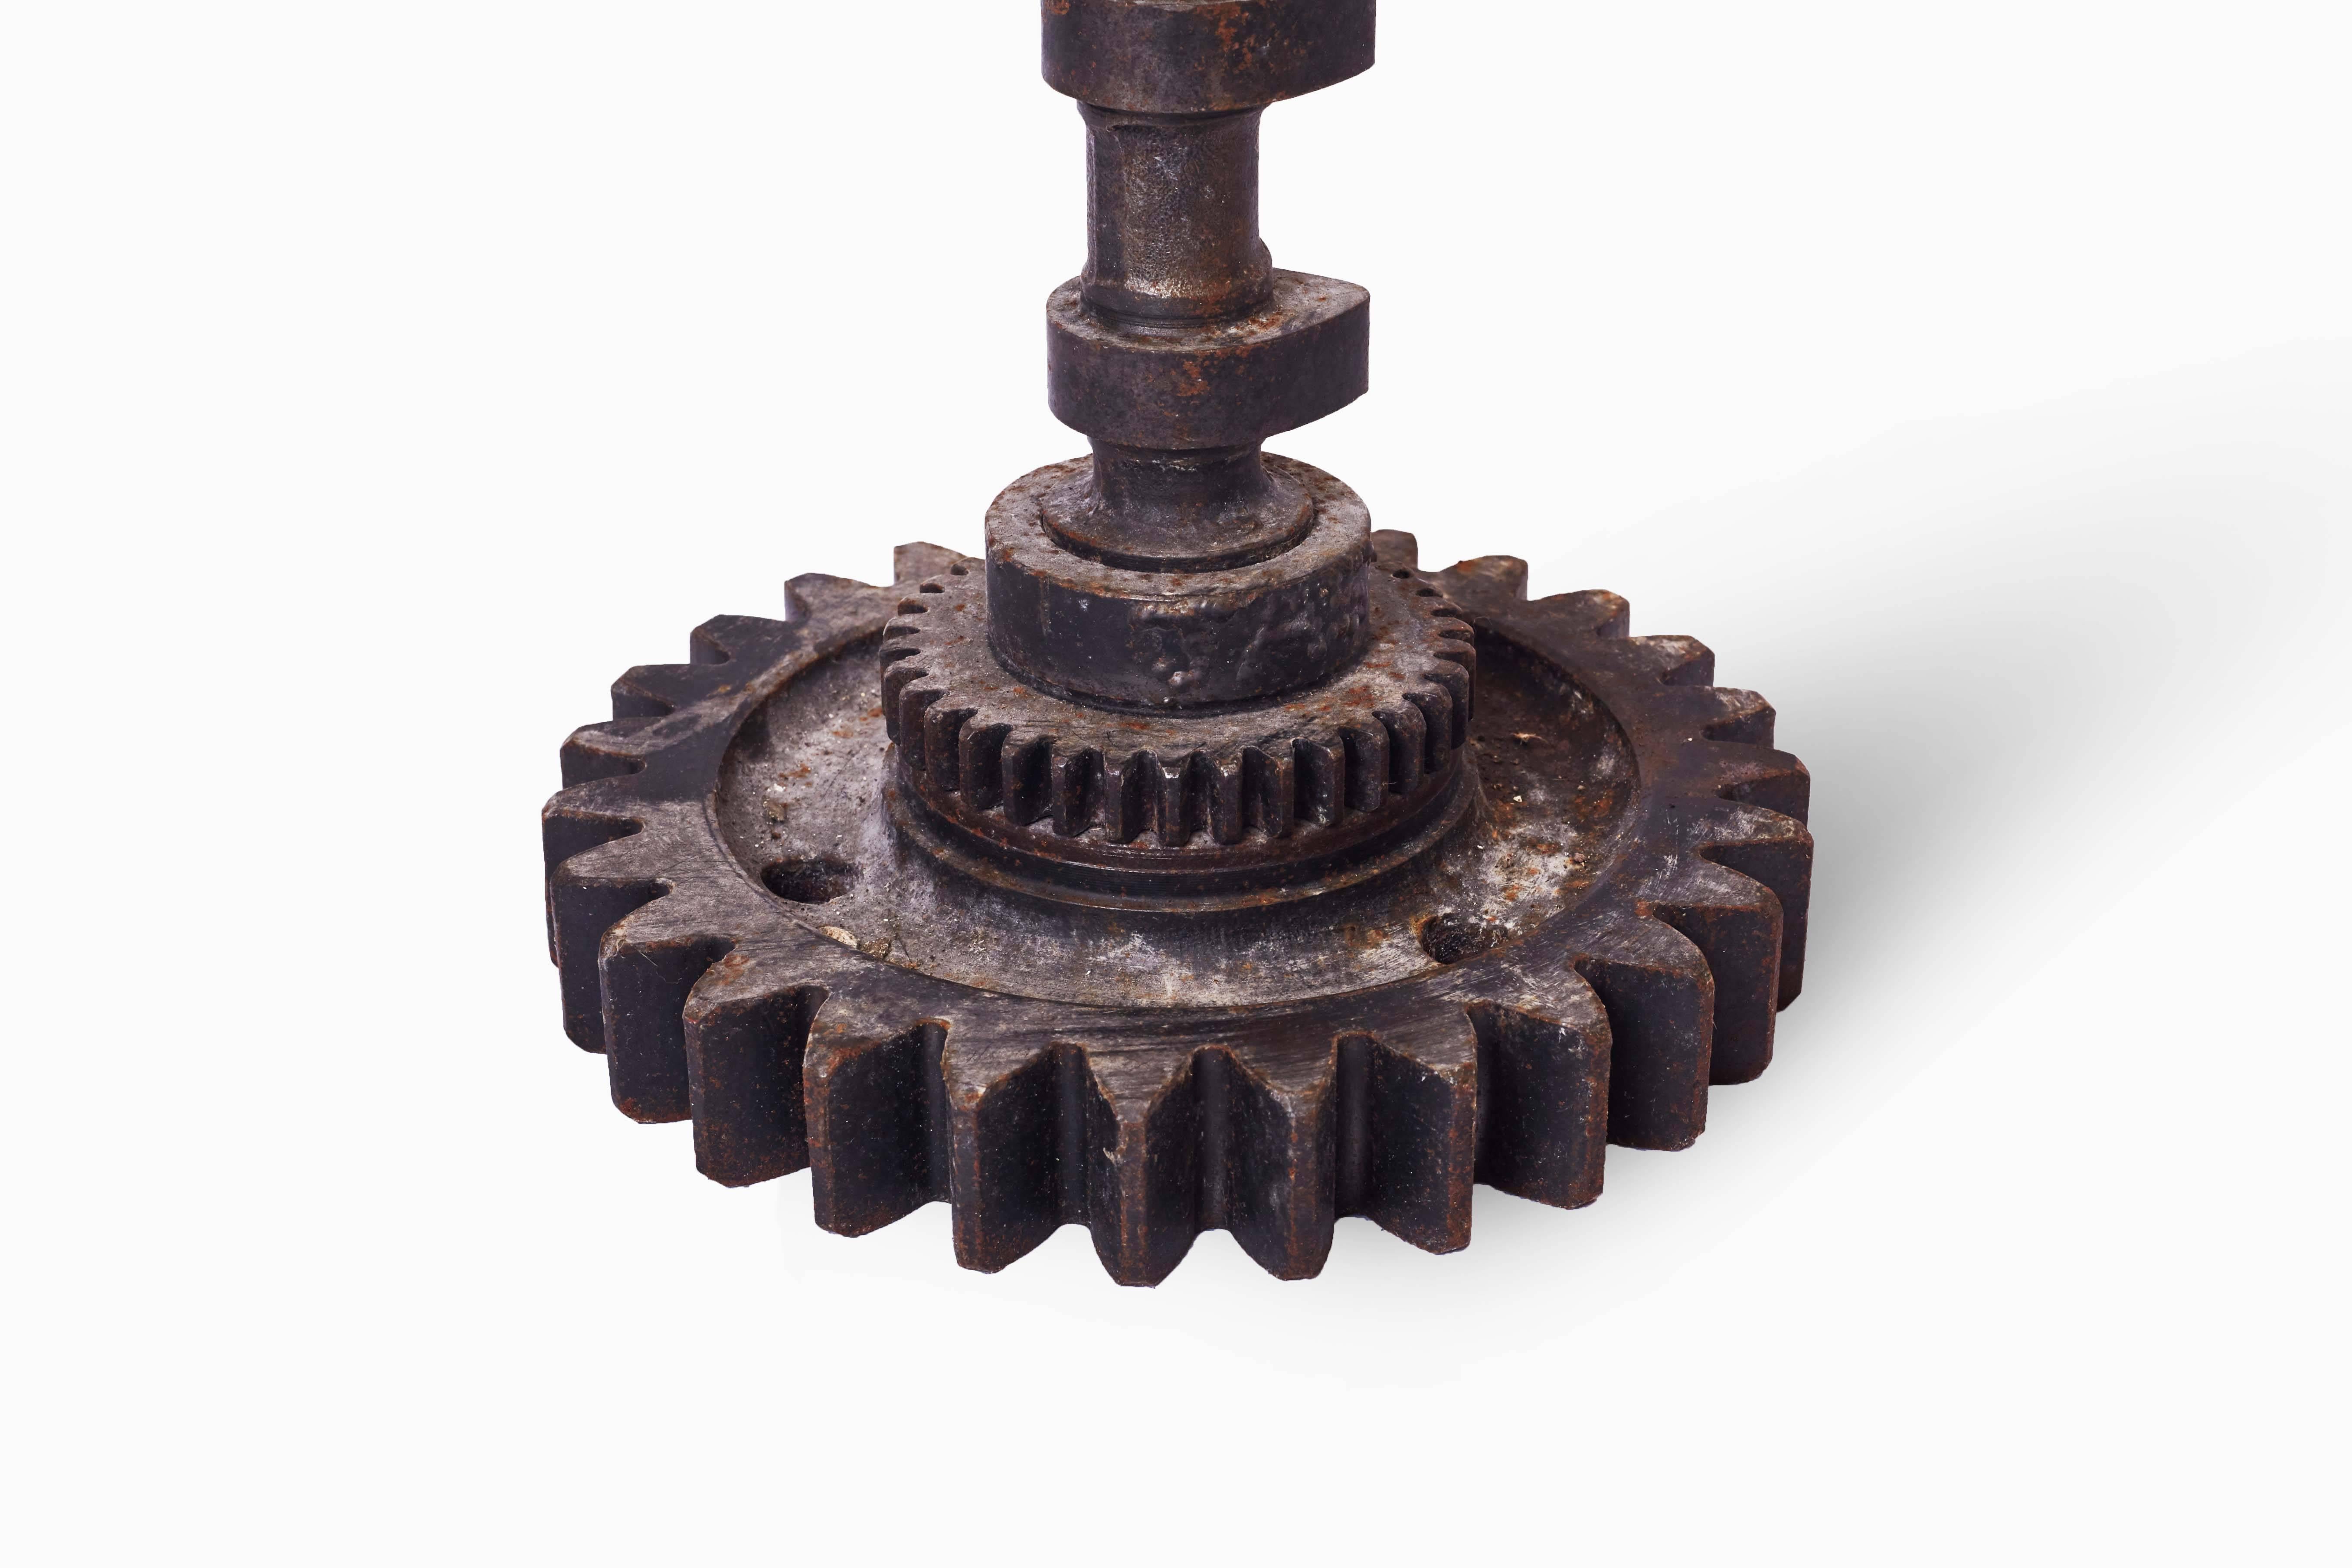 Brutalist candleholder created from recycled spare parts of old machinery found in Indonesia.